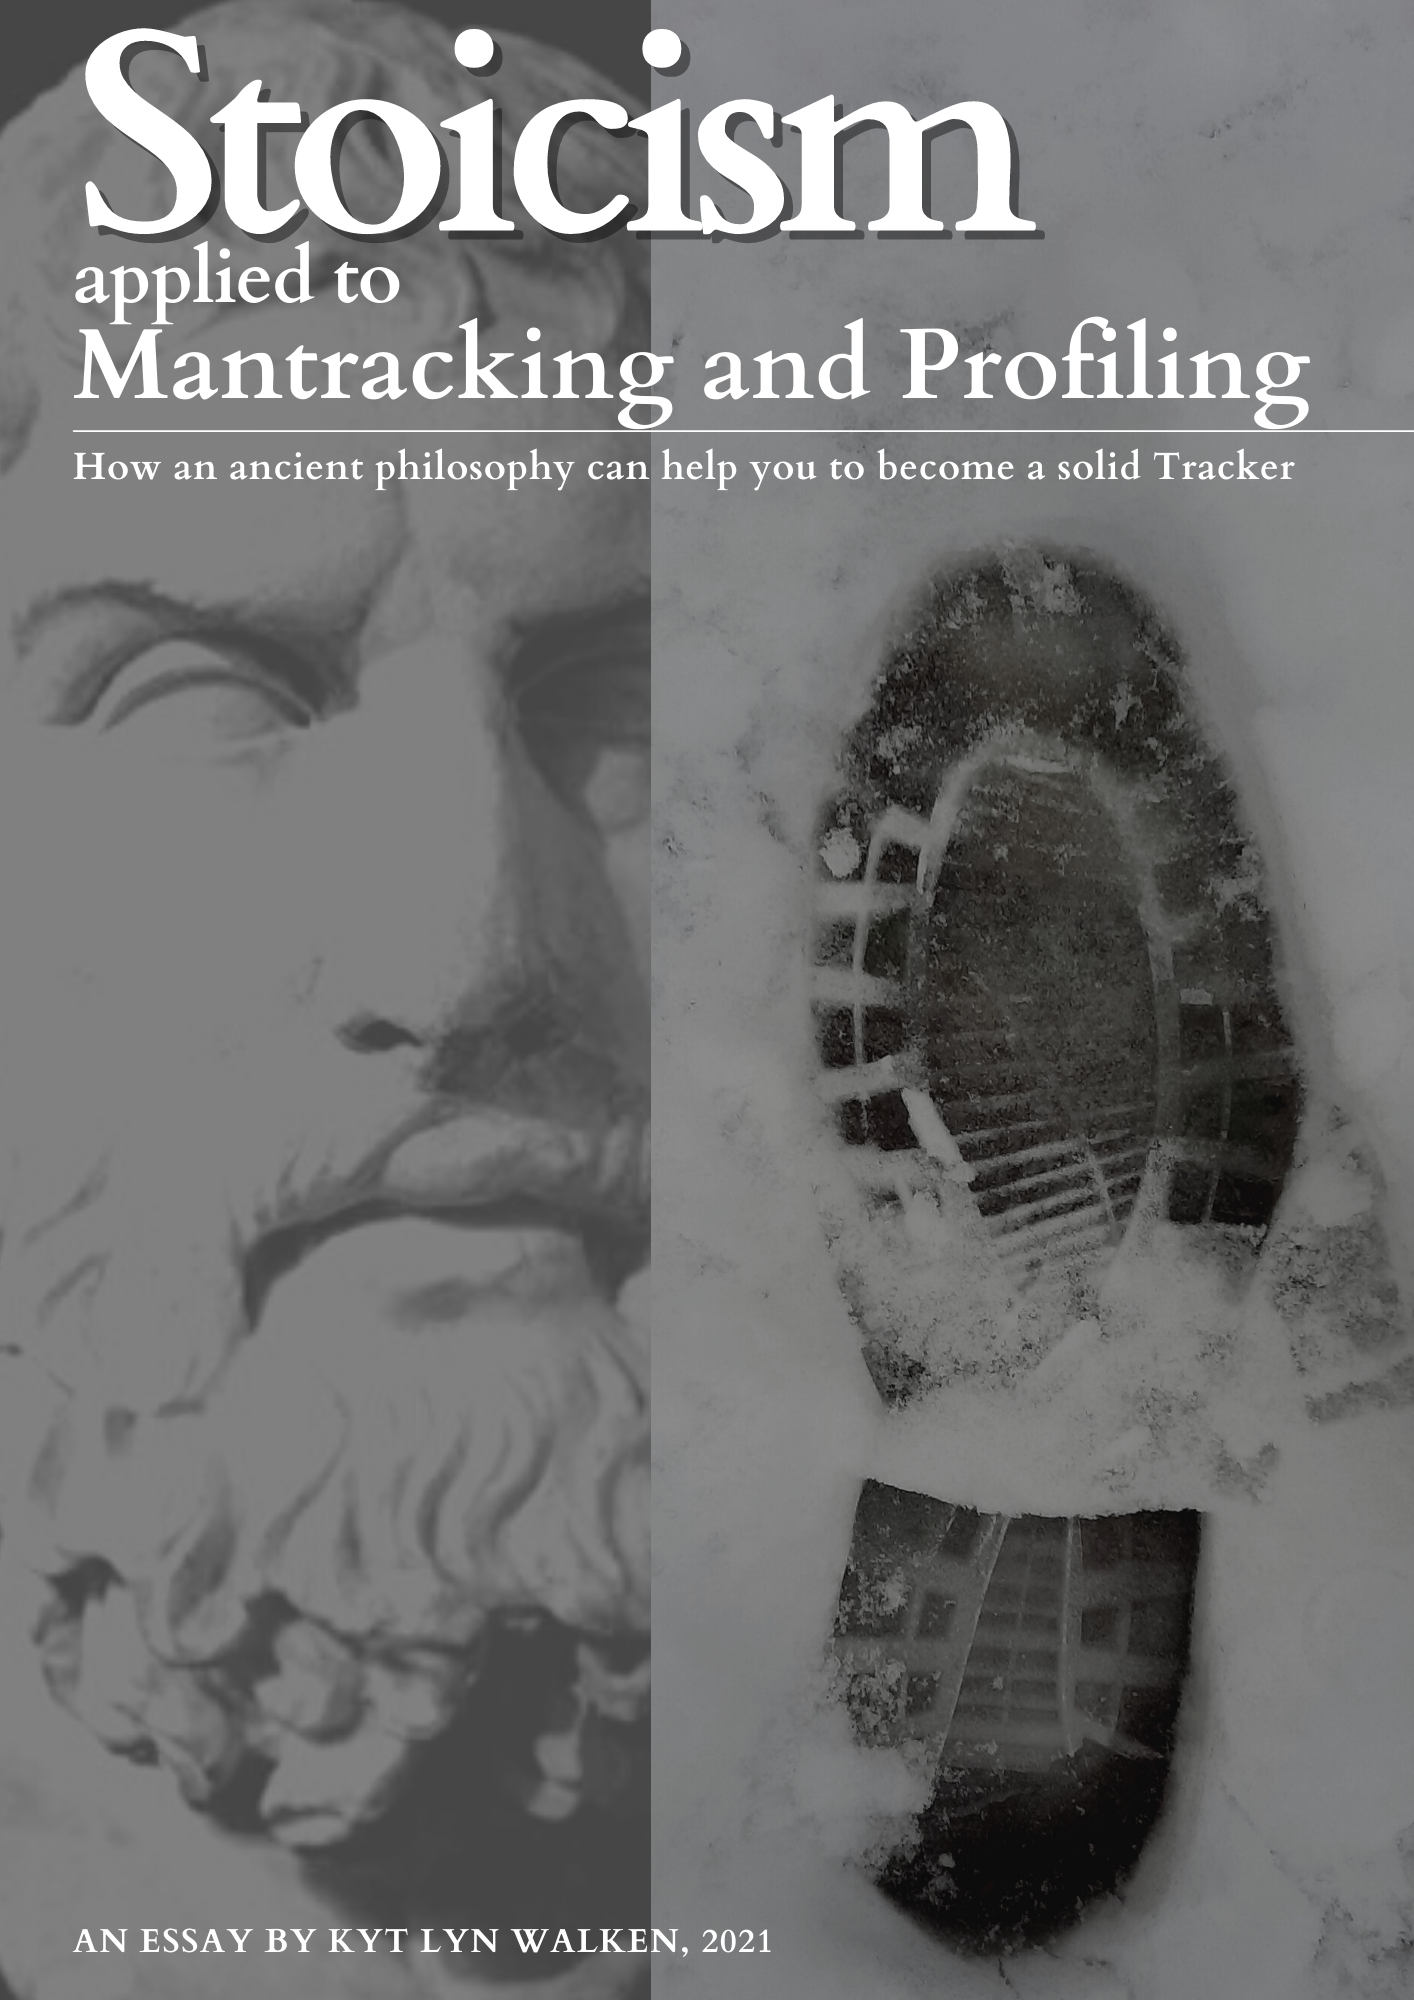 Mantracking and Stoicism